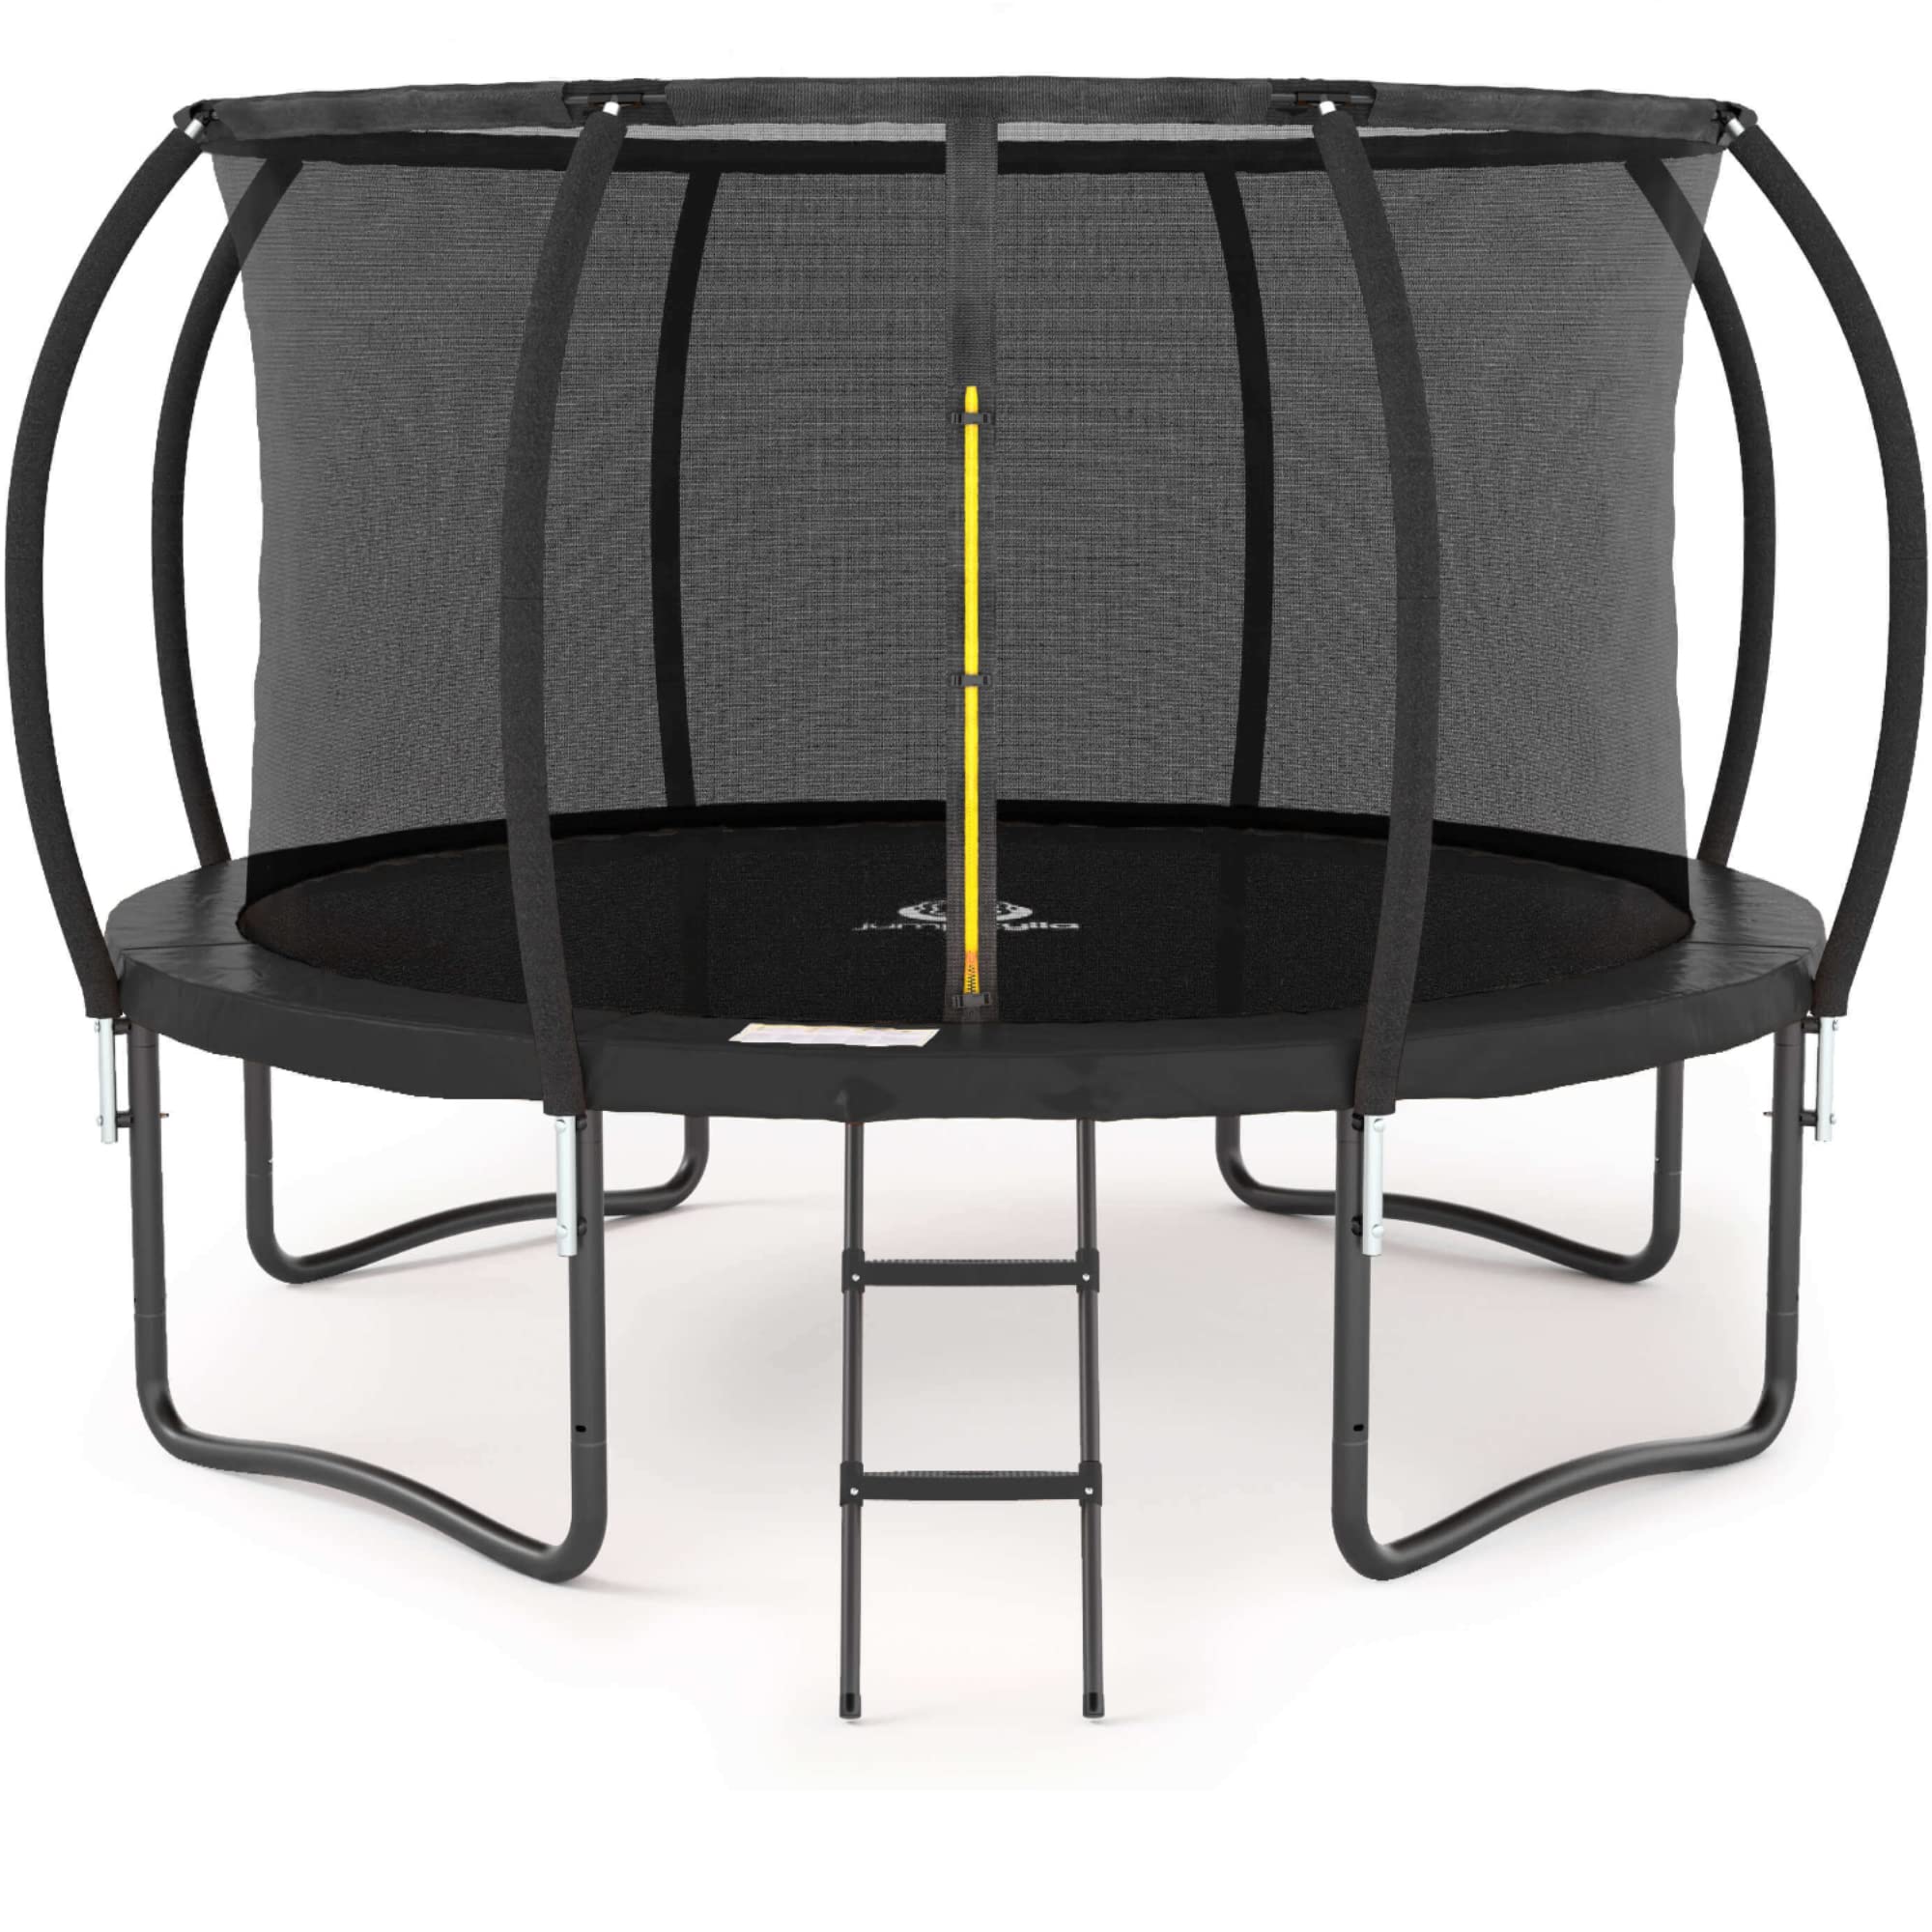 Jumpzylla Trampoline 8Ft 10Ft 12Ft 14Ft Trampoline With Enclosure - Recreational Trampolines With Ladder And Galvanized Anti-Rus